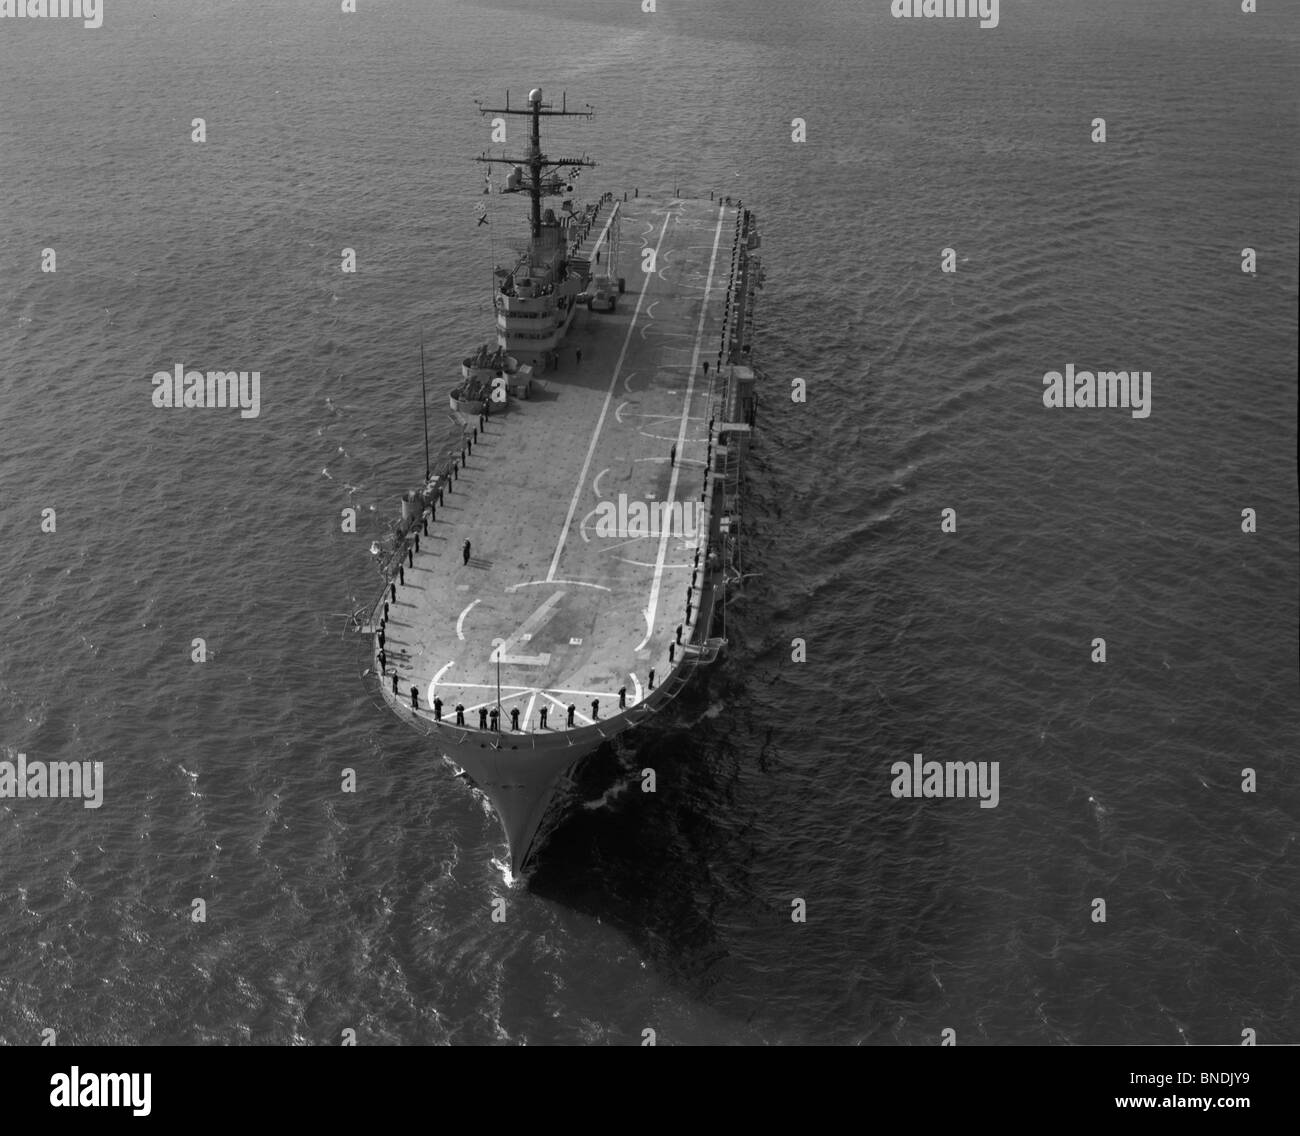 High angle view of an aircraft carrier in the sea Stock Photo